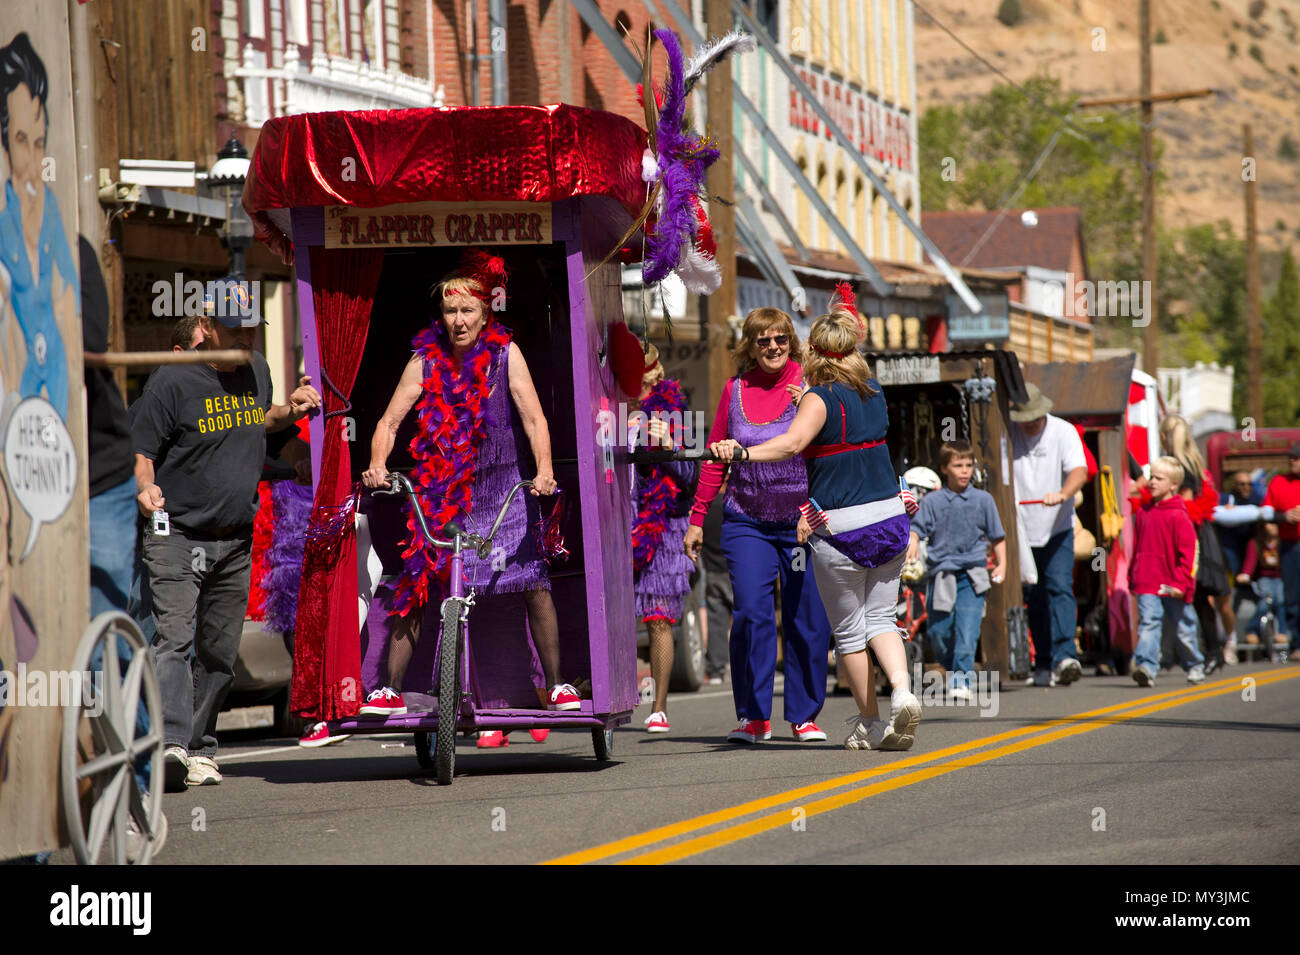 The annual Virginia City, Nevada, outhouse races, one of the quirkiest